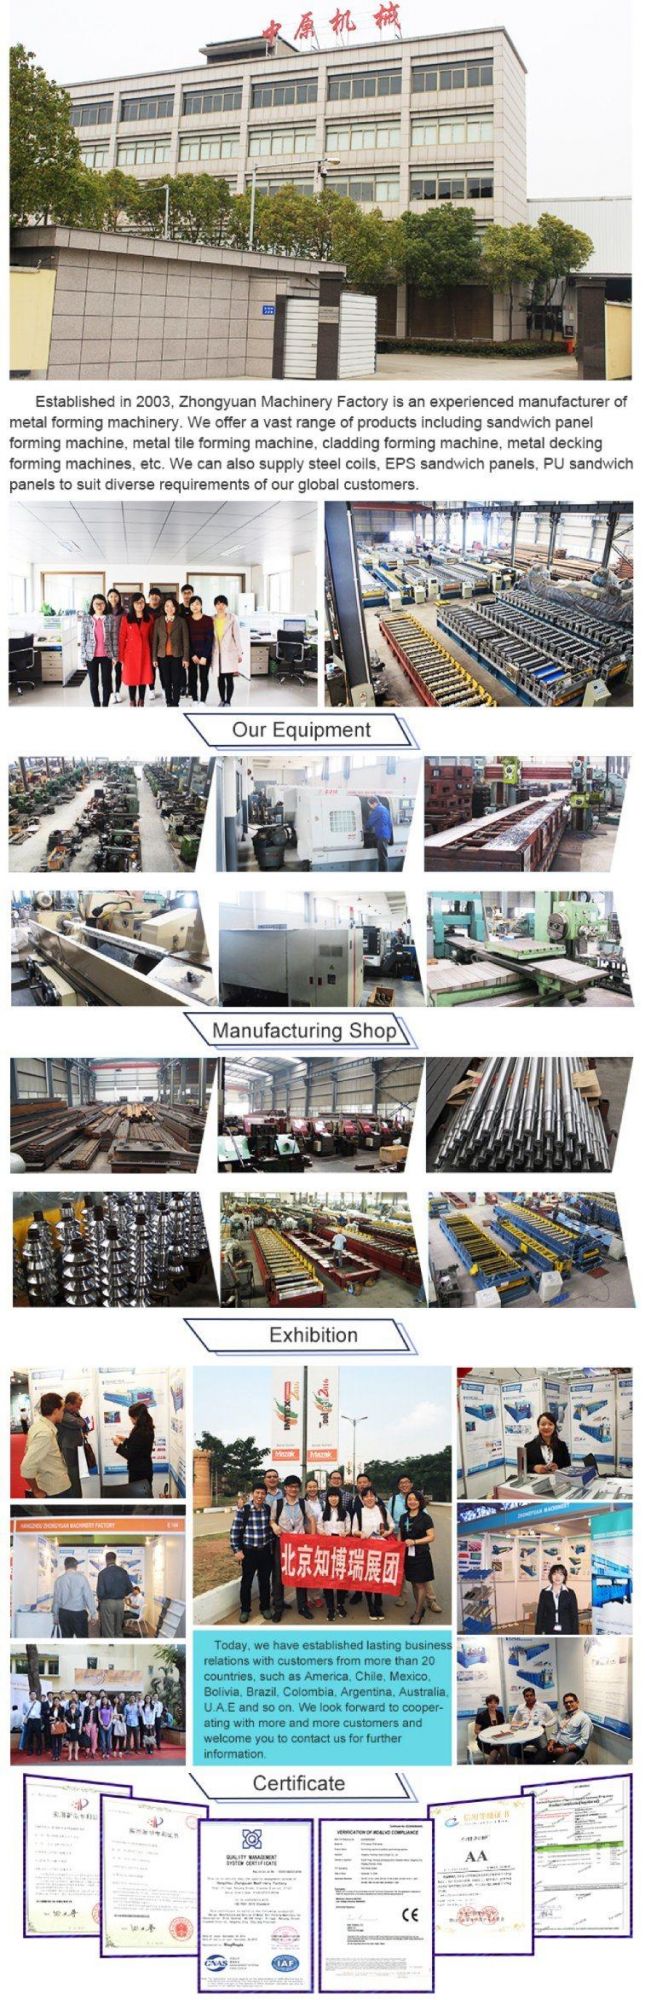 Galvanized Steel Step Machinery Building Material Roof Sheet Glazed Tile Roll Forming Machine Factory Price with ISO9001/Ce/SGS/Soncap